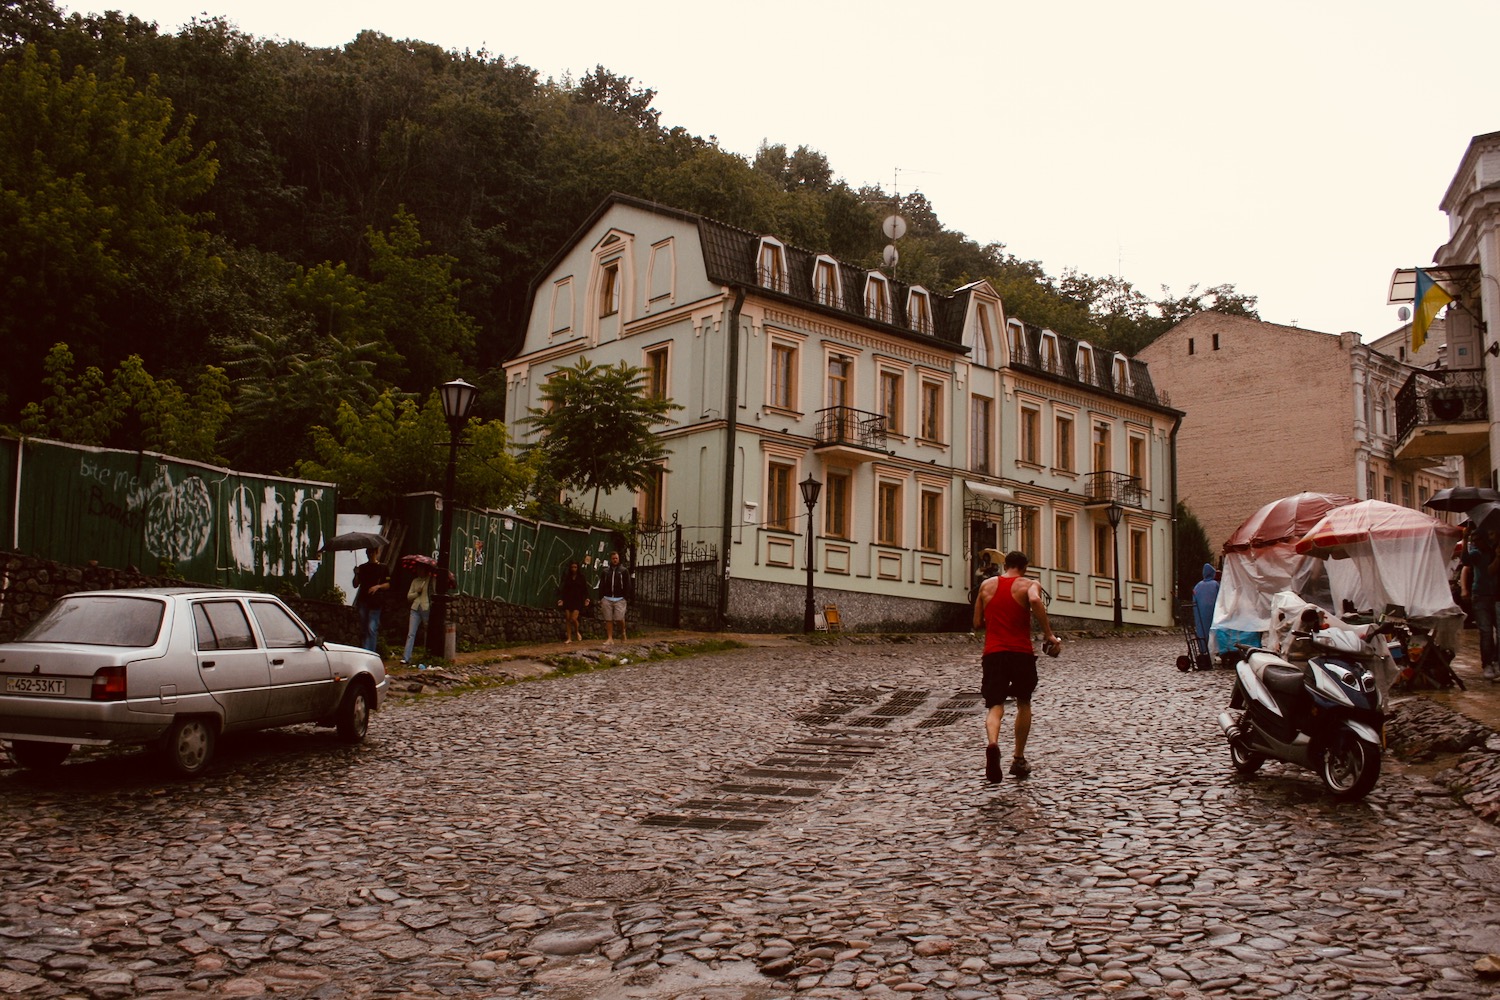 a man walking on a cobblestone road with a couple of people